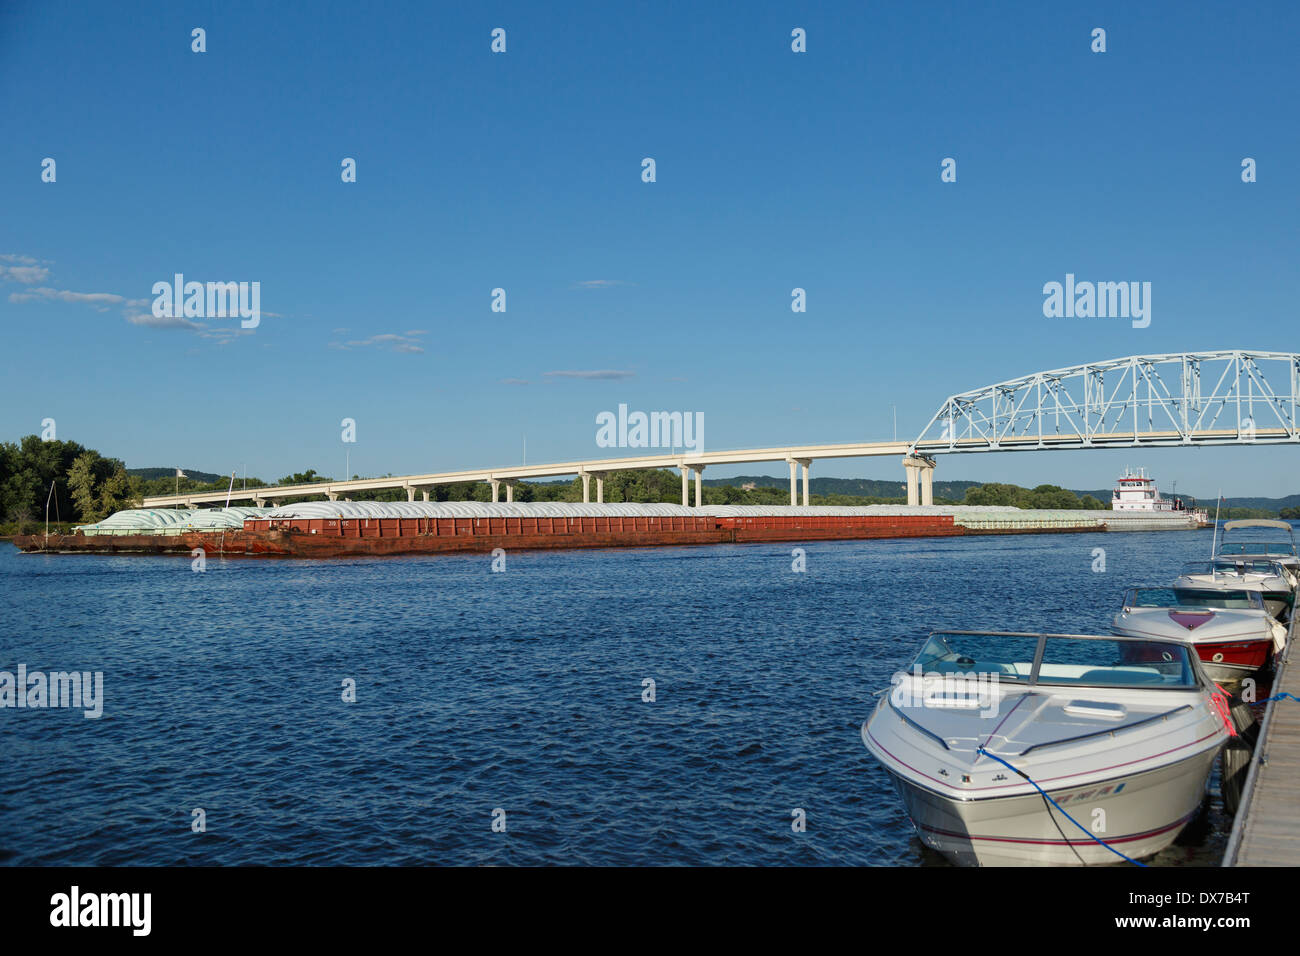 Grain barges pushed upstream on Mississippi River in Wabasha, MN. Stock Photo